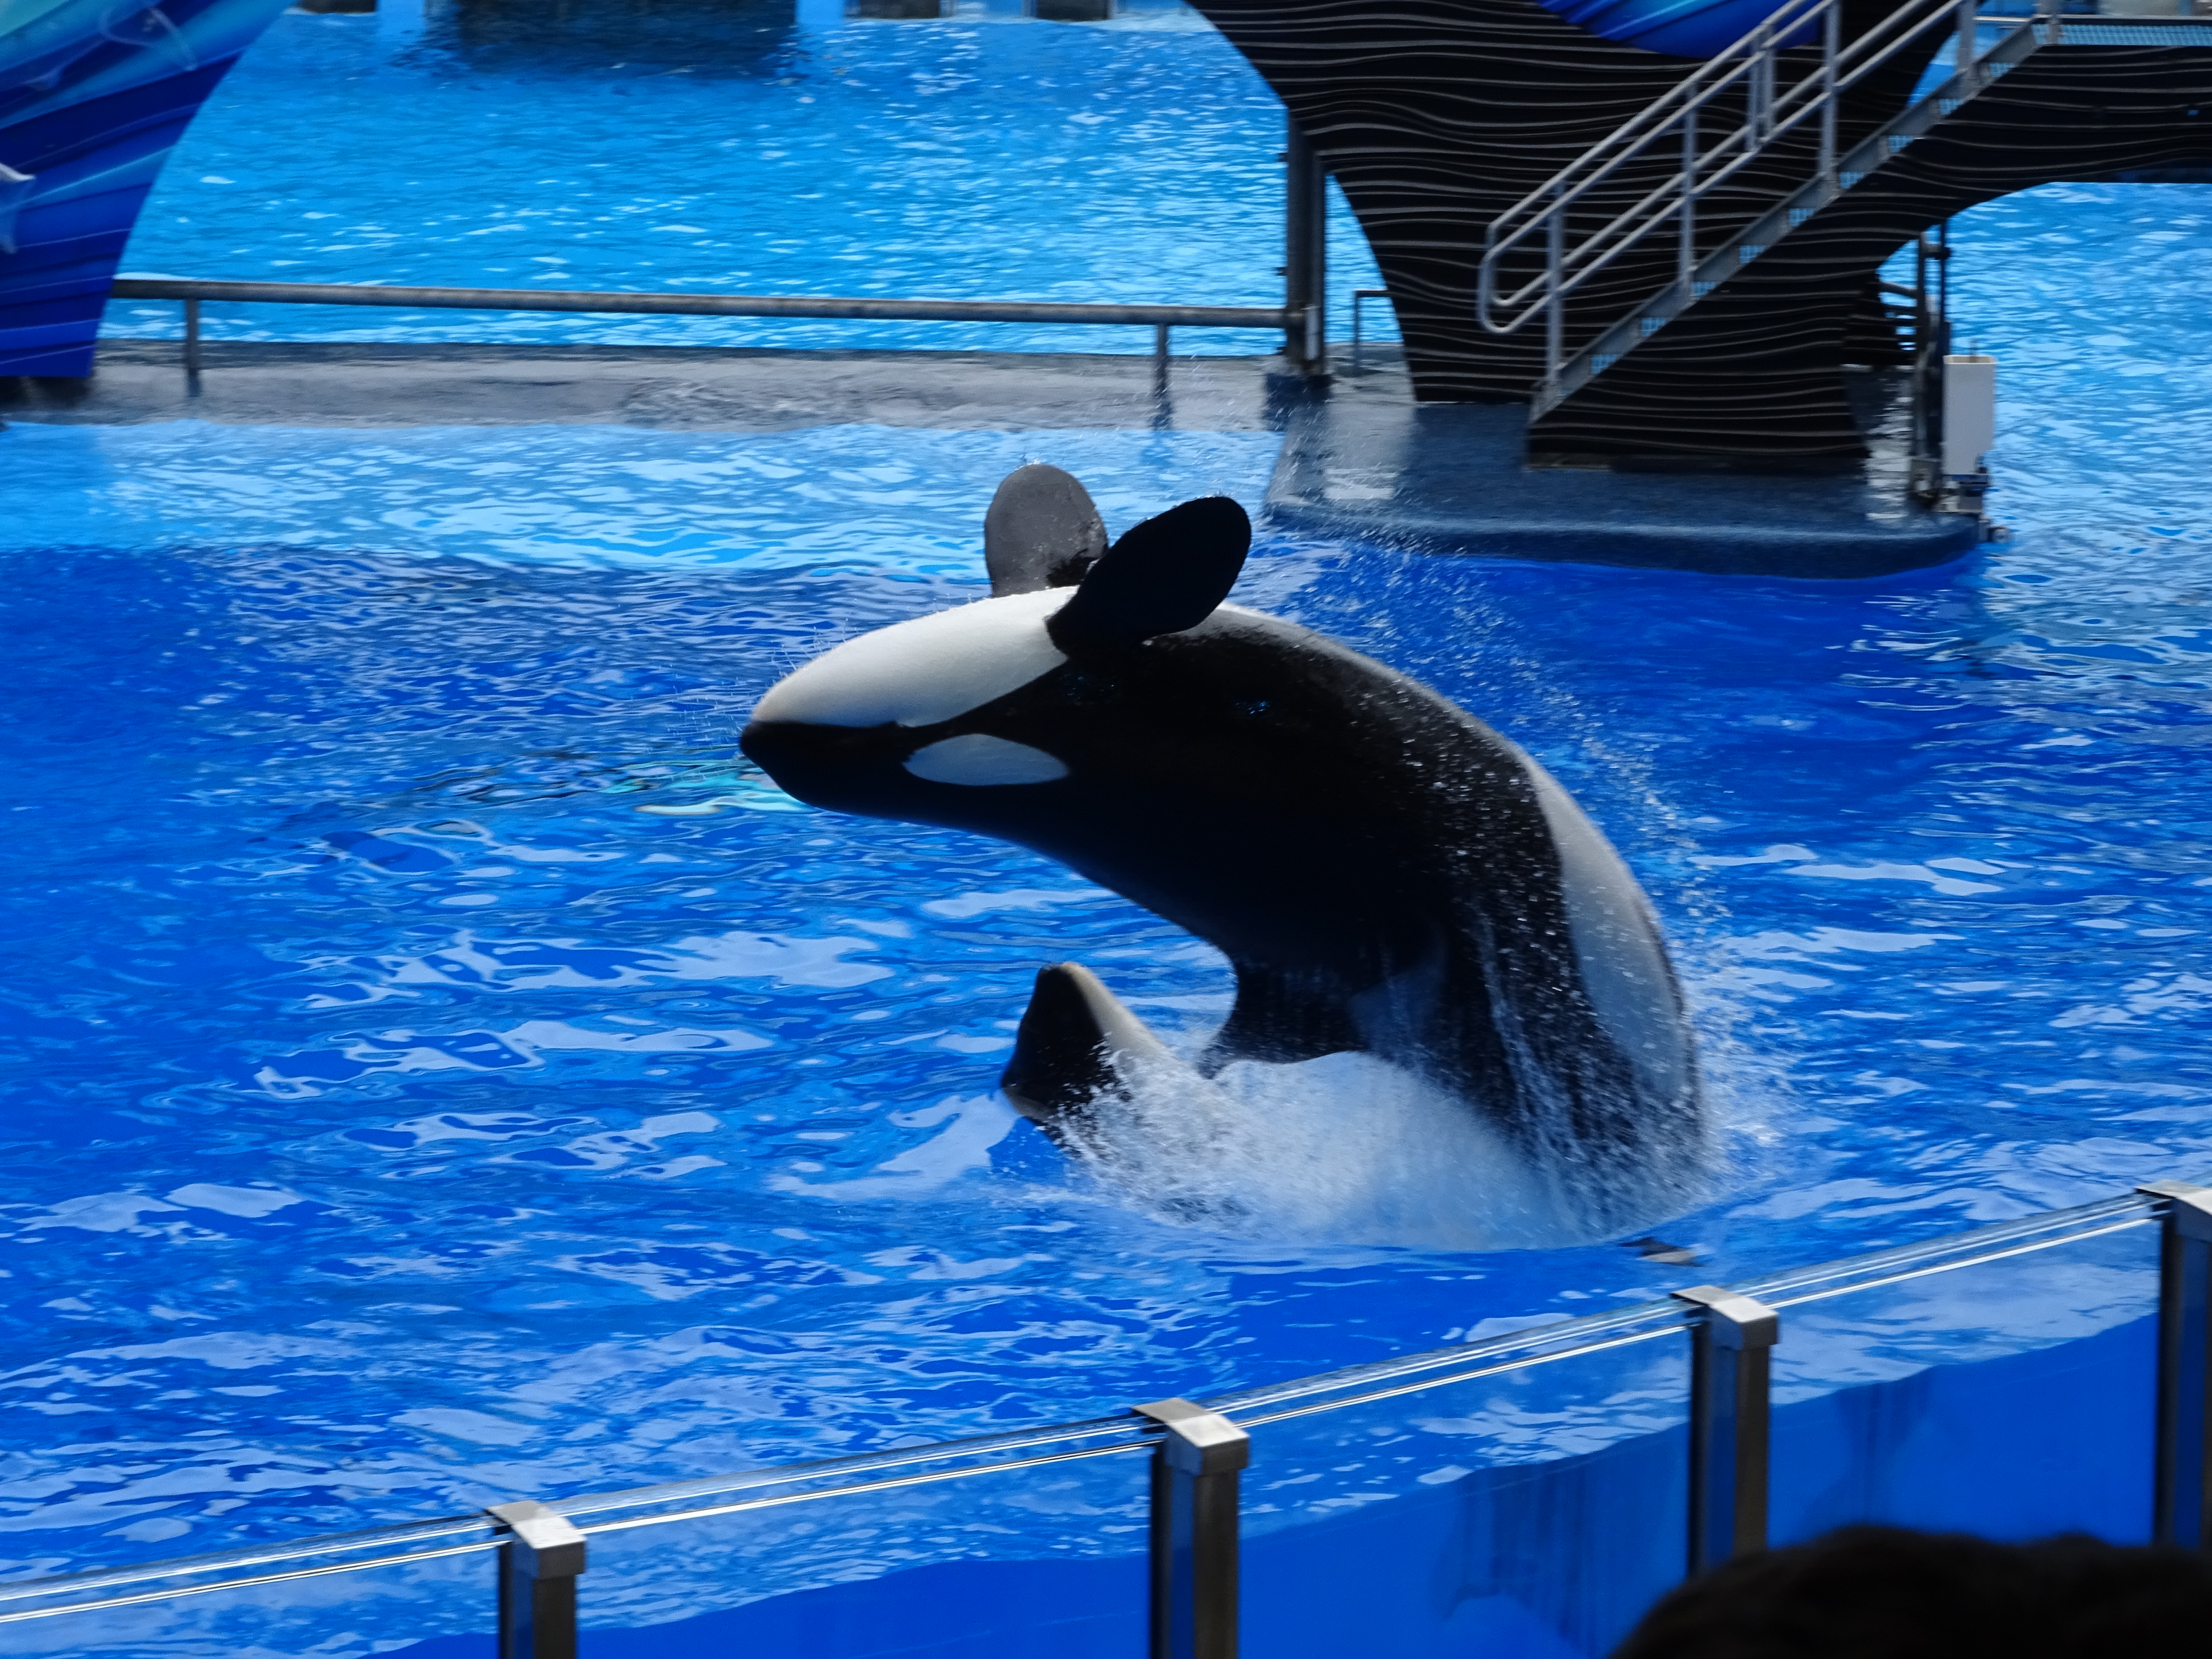 Archived: The Holiday Blog – Day 2: Sea World - archived